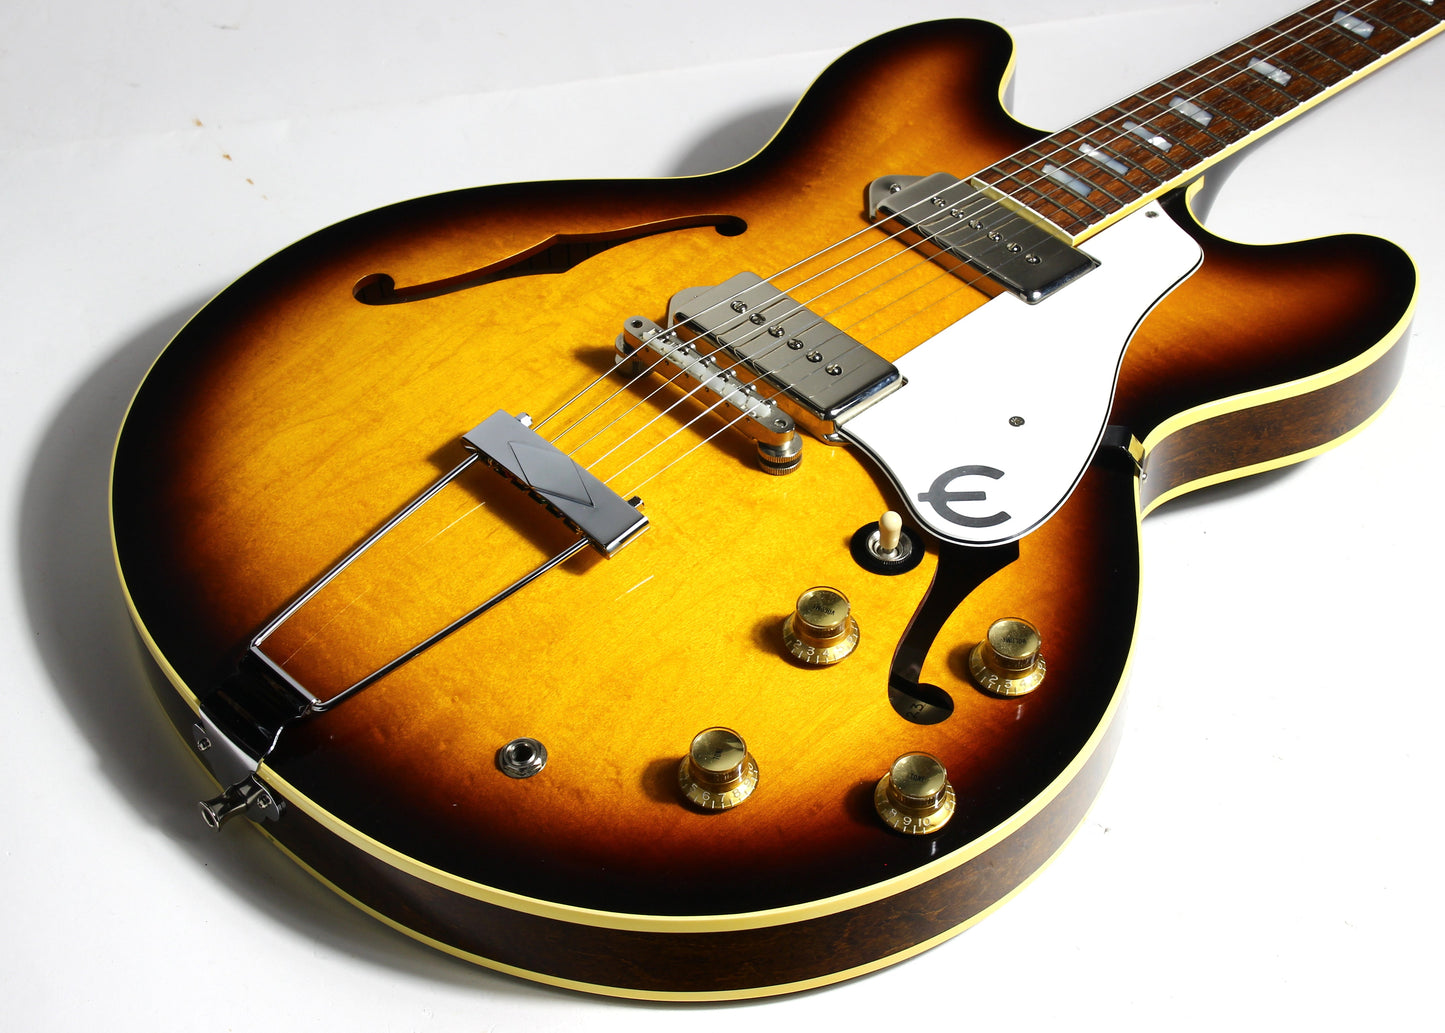 1999 Epiphone USA Collection John Lennon 1965 Casino Beatles ‘65 Limited Edition Sunburst - Low Number! Gibson